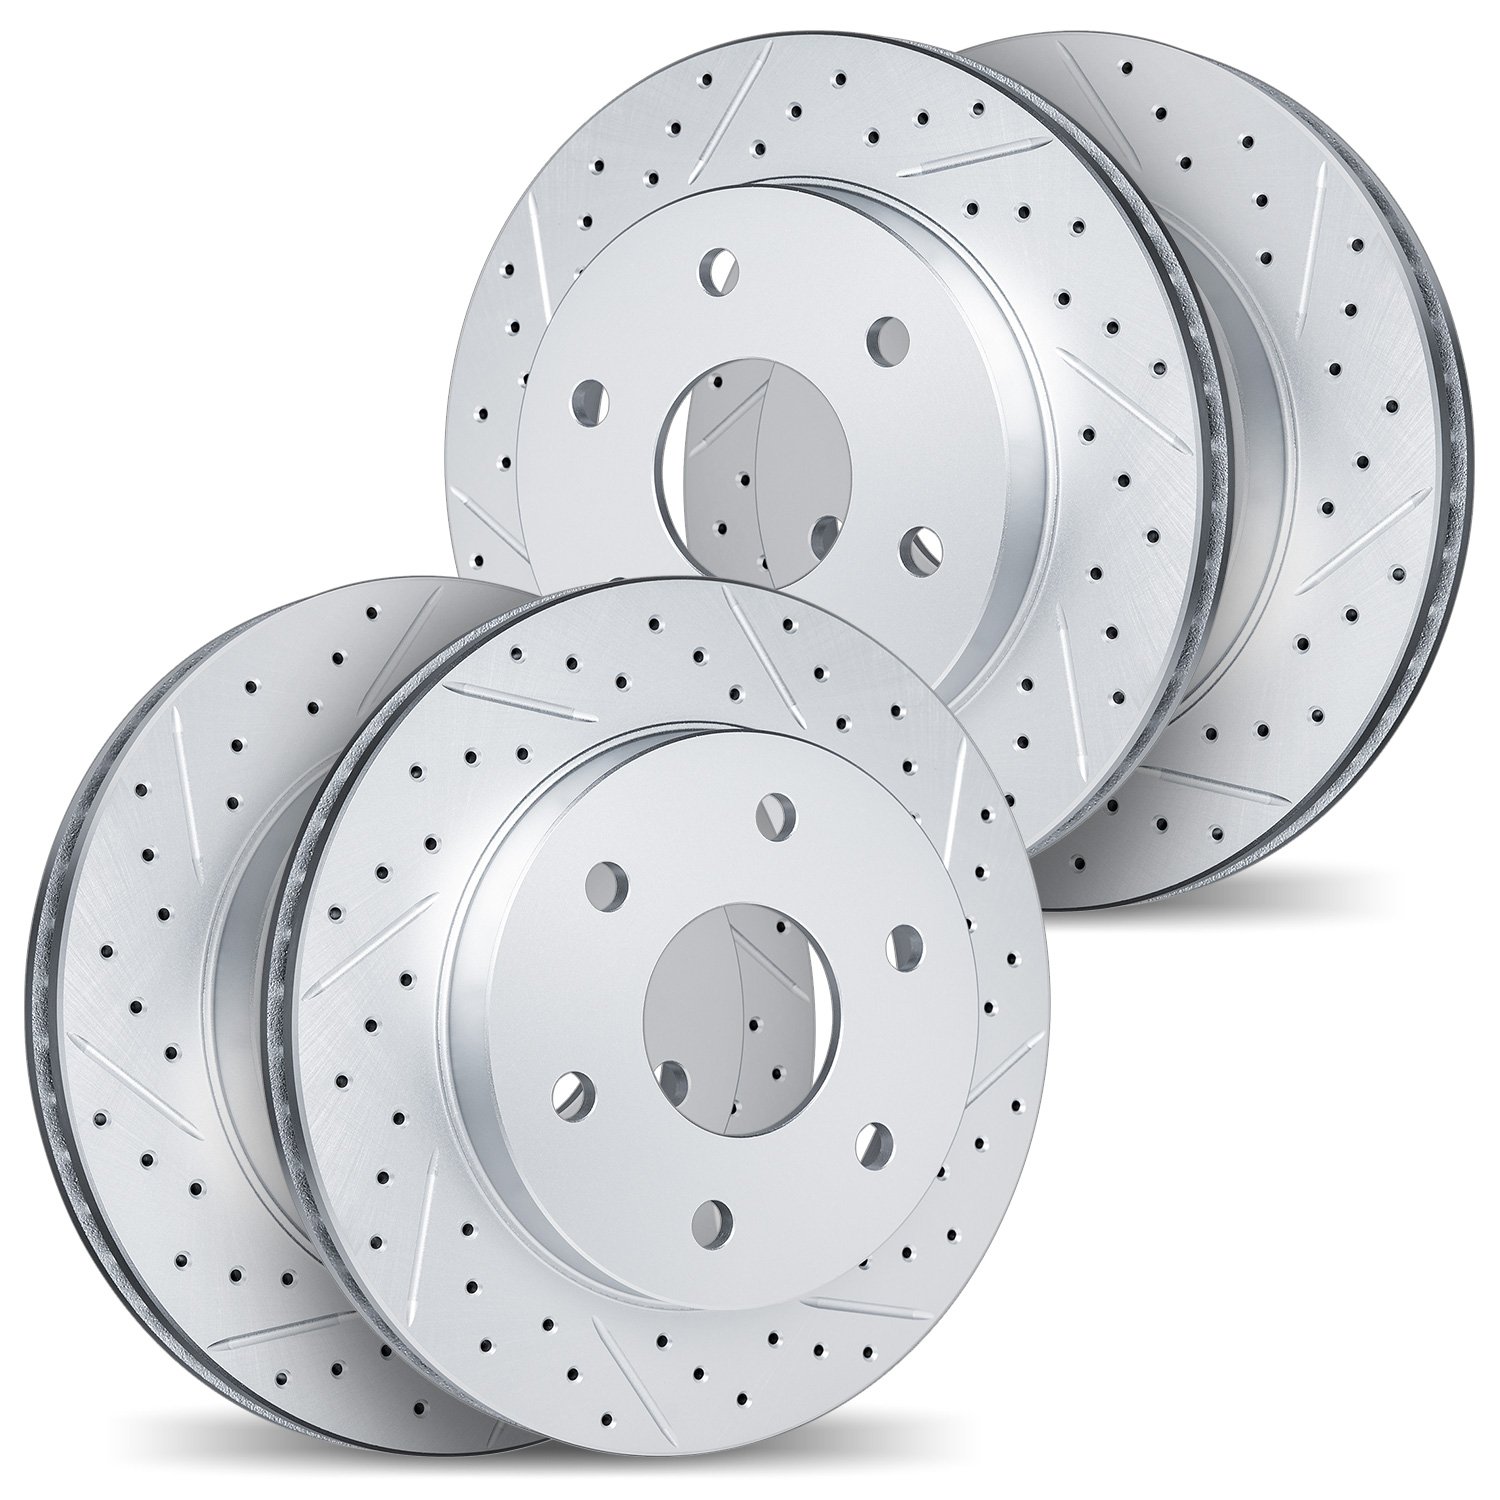 2004-54097 Geoperformance Drilled/Slotted Brake Rotors, 2004-2008 Ford/Lincoln/Mercury/Mazda, Position: Front and Rear